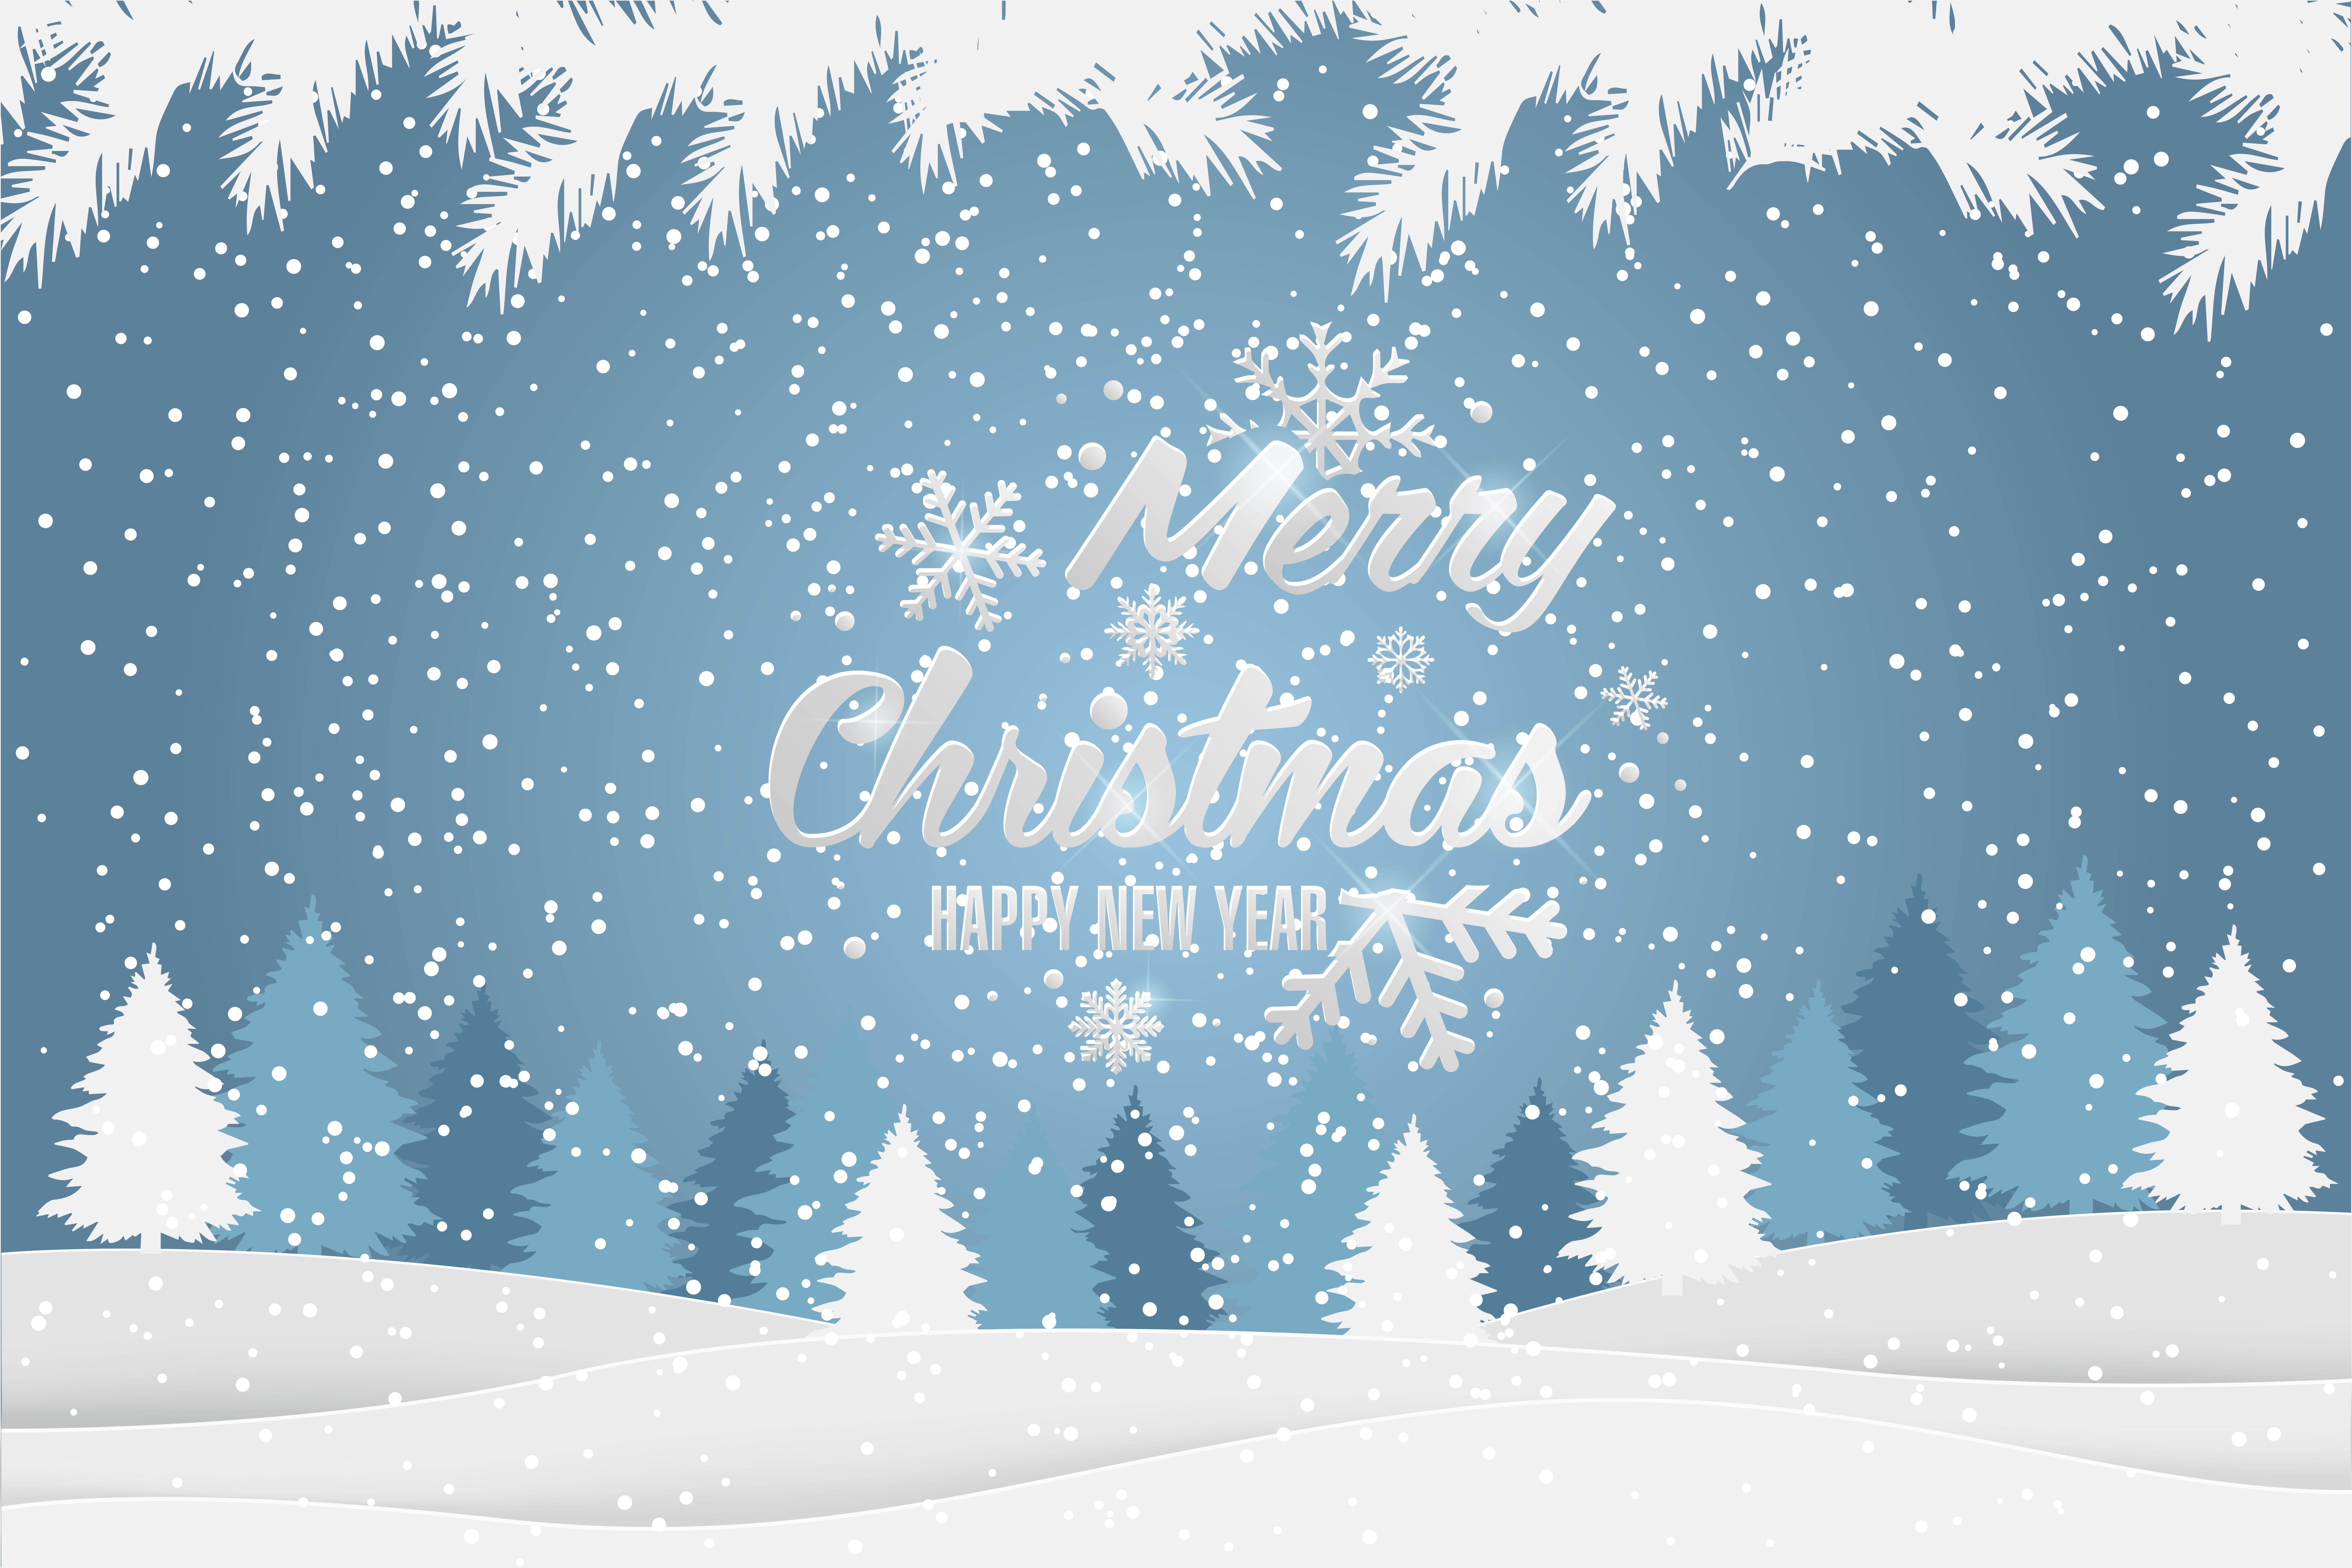 Christmas and New Year Typographical Xmas background with winter landscape. Merry Christmas card. Vector Illustration Free Vectors, Clipart Graphics & Vector Art